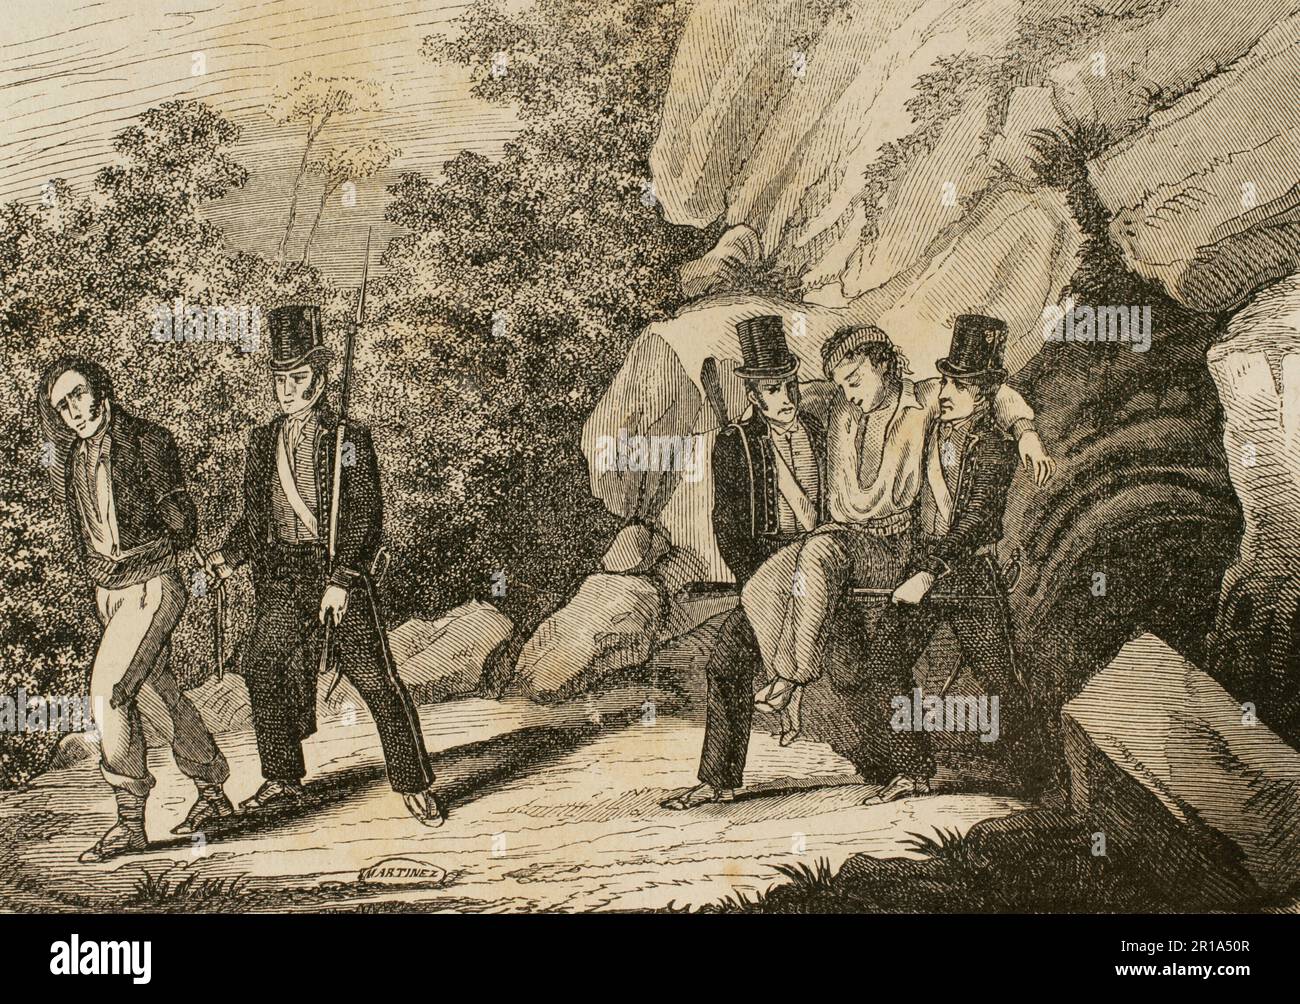 History of Banditry. Catalonia. Squadrons of Catalonia (Mossos d'Esquadra) arresting a bandit (wearing uniform dated 1850). 'The bandit expired as soon as he was taken out of the cave'. Engraving. Historia de las Escuadras de Cataluña, 1876. Stock Photo